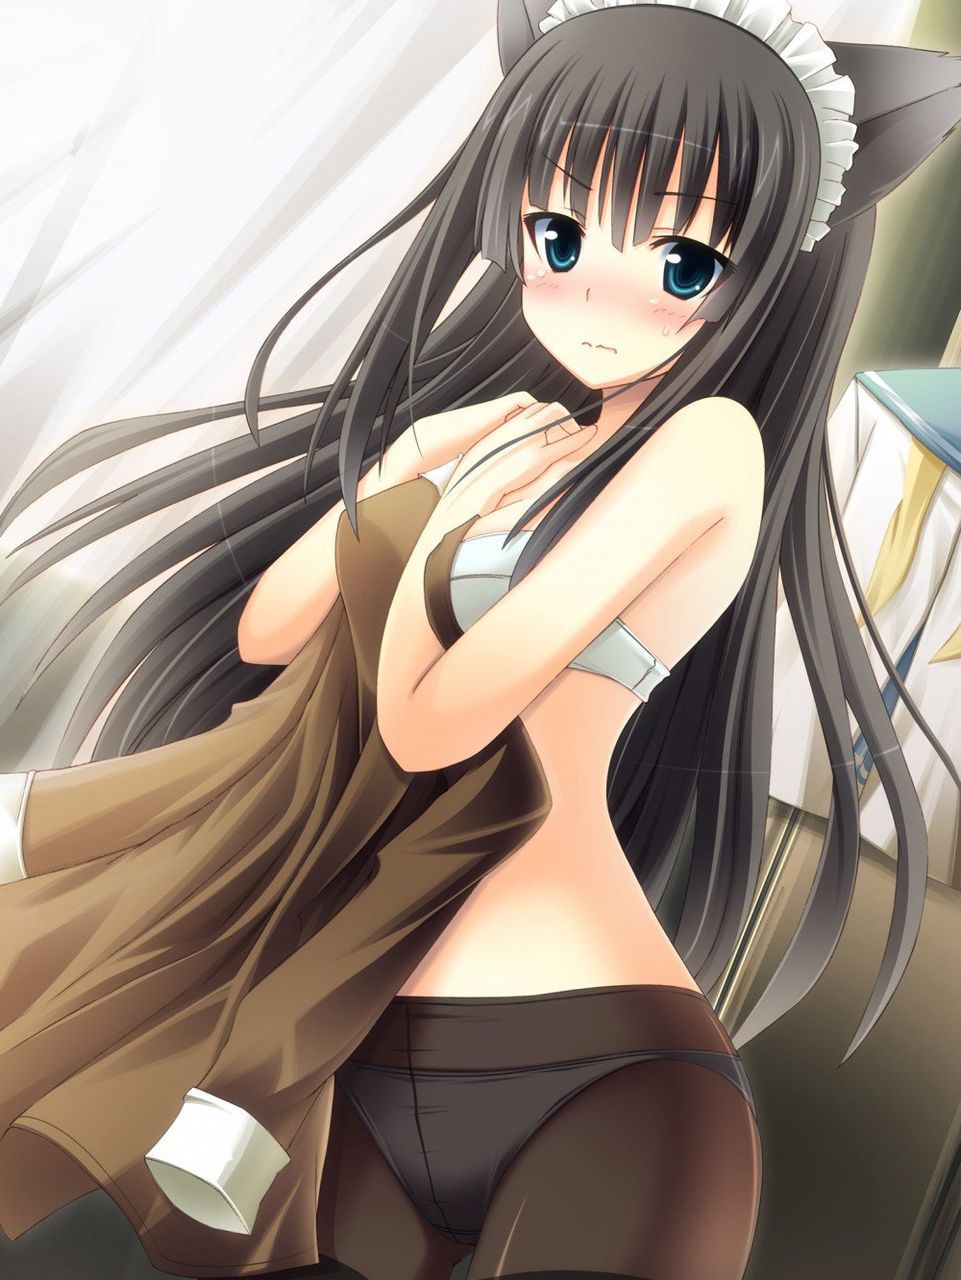 Please a lucky lewd image which came across a girl in changing clothes 11